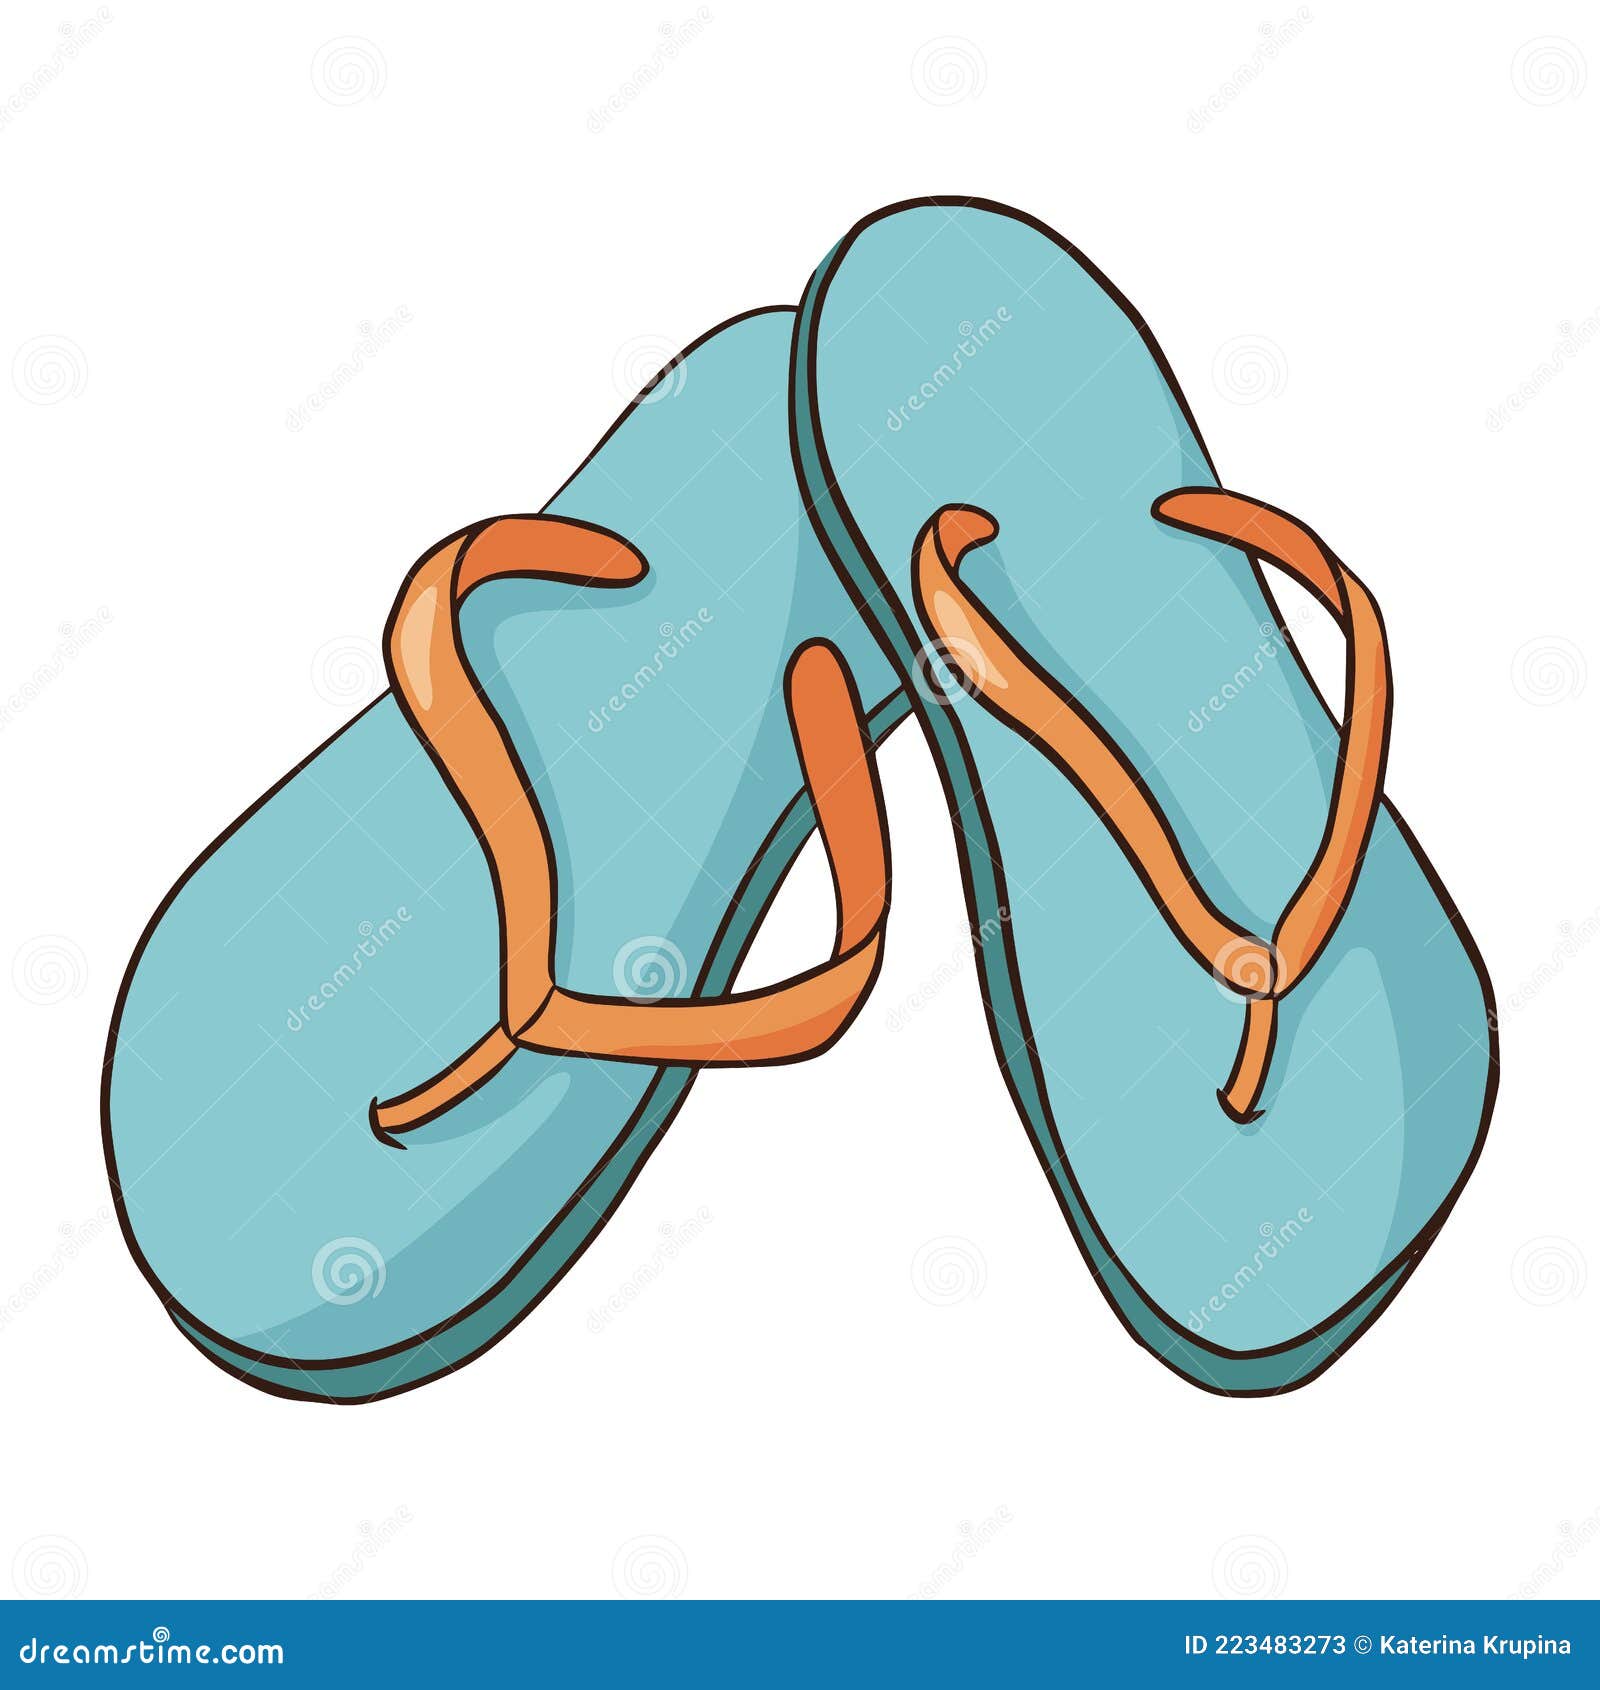 Pair of flip flop slippers hand drawn outline Vector Image